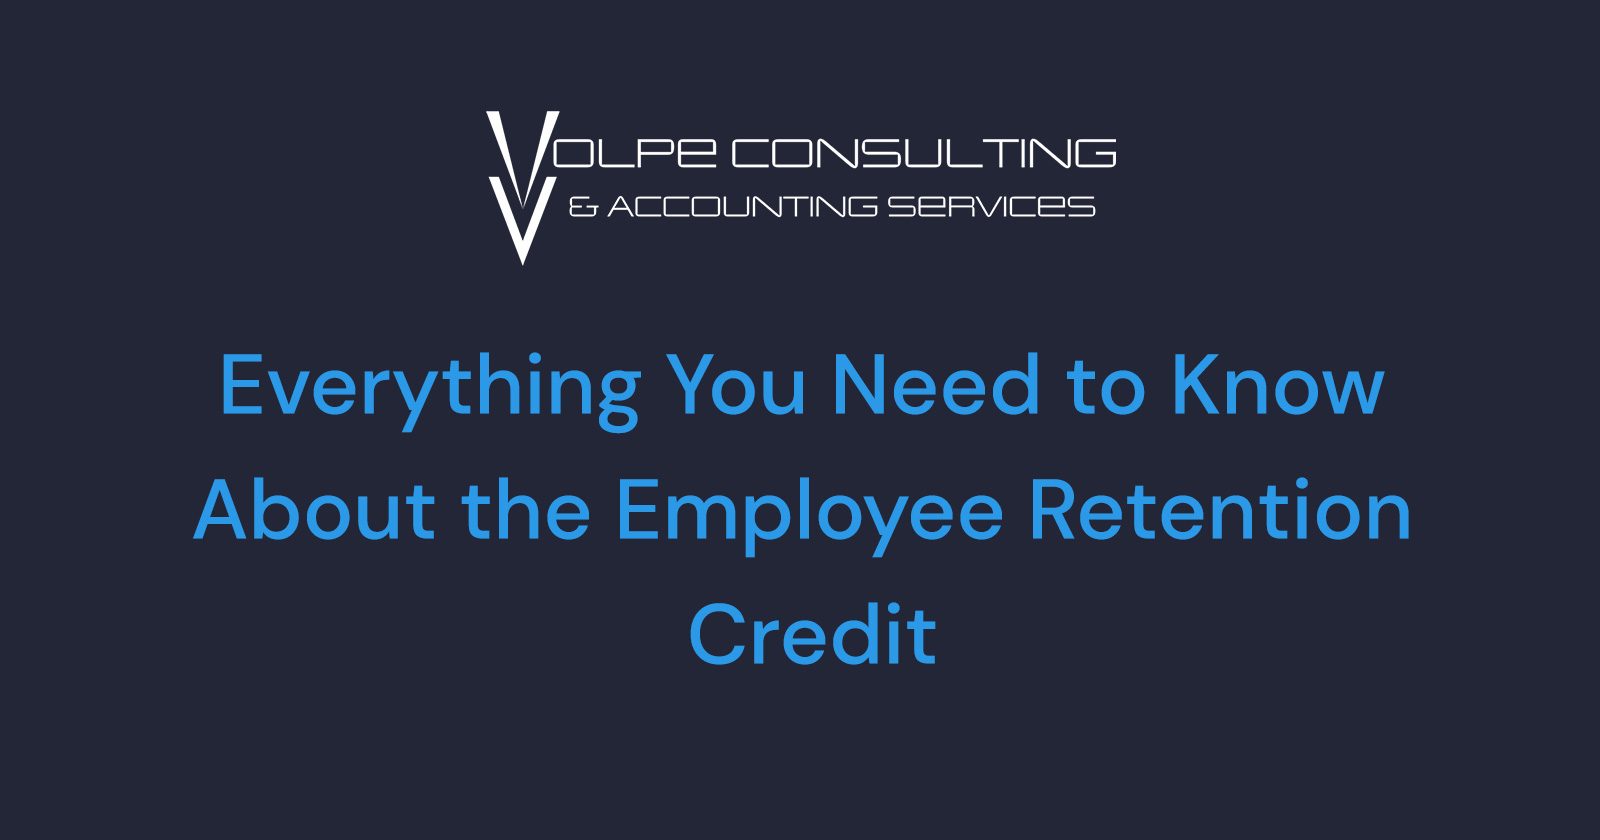 Top Rated Why Are The Employee Retention Credit Refunds Taking So